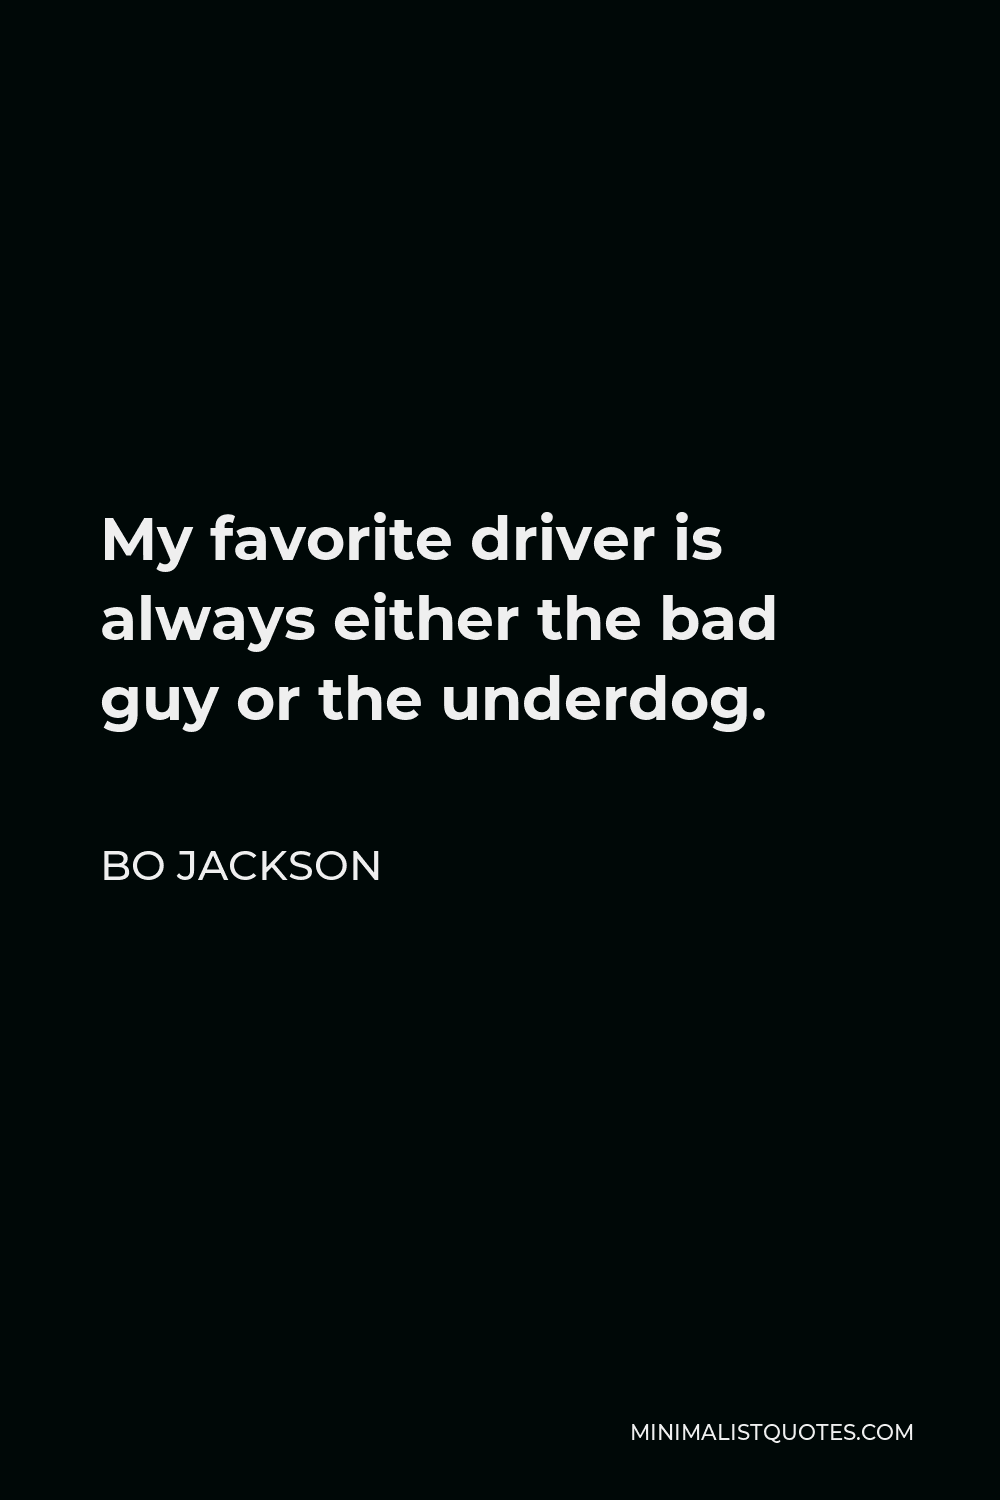 Bo Jackson Quote - My favorite driver is always either the bad guy or the underdog.